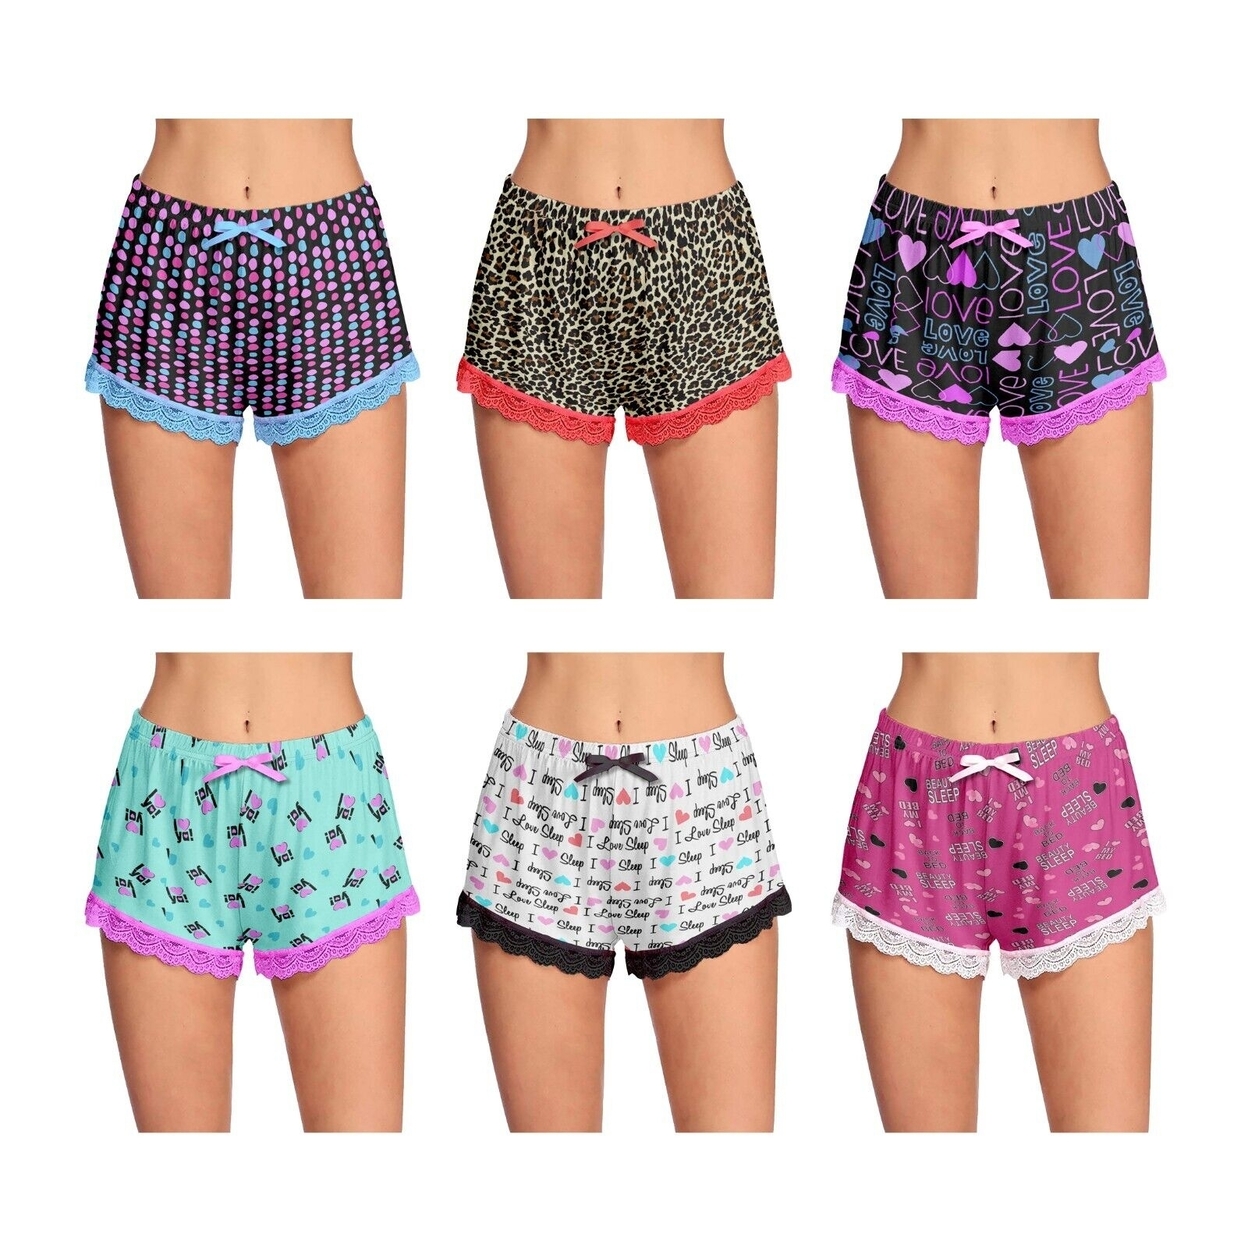 6-Pack: Women's Ultra-Soft Cozy Fun Printed Lace Trim Pajama Lounge Shorts - Small, Love